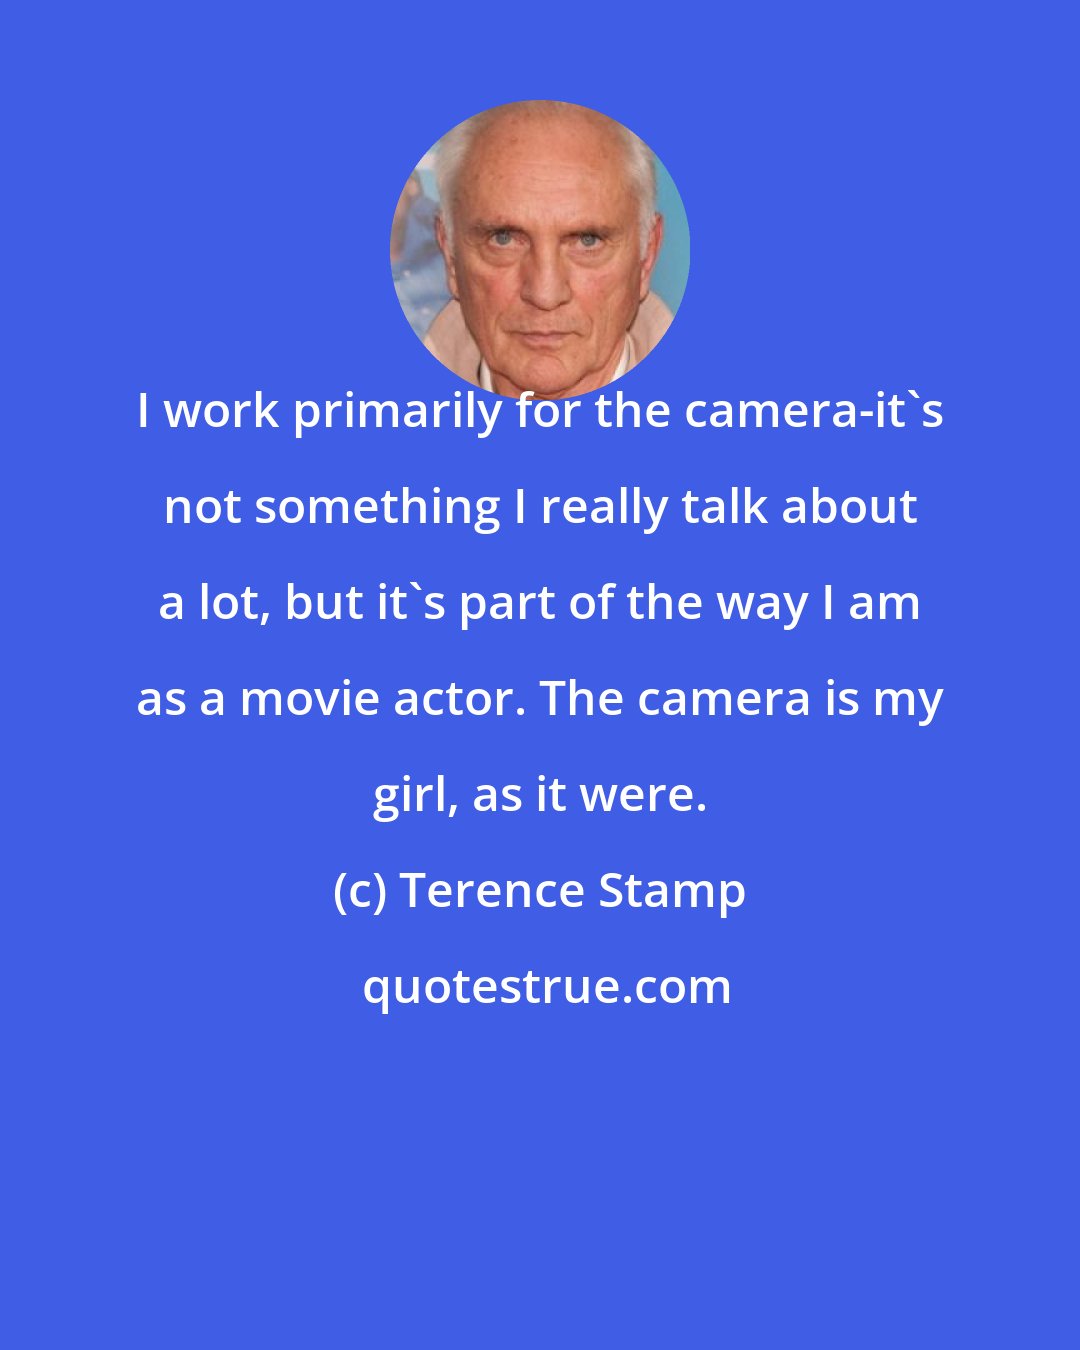 Terence Stamp: I work primarily for the camera-it's not something I really talk about a lot, but it's part of the way I am as a movie actor. The camera is my girl, as it were.